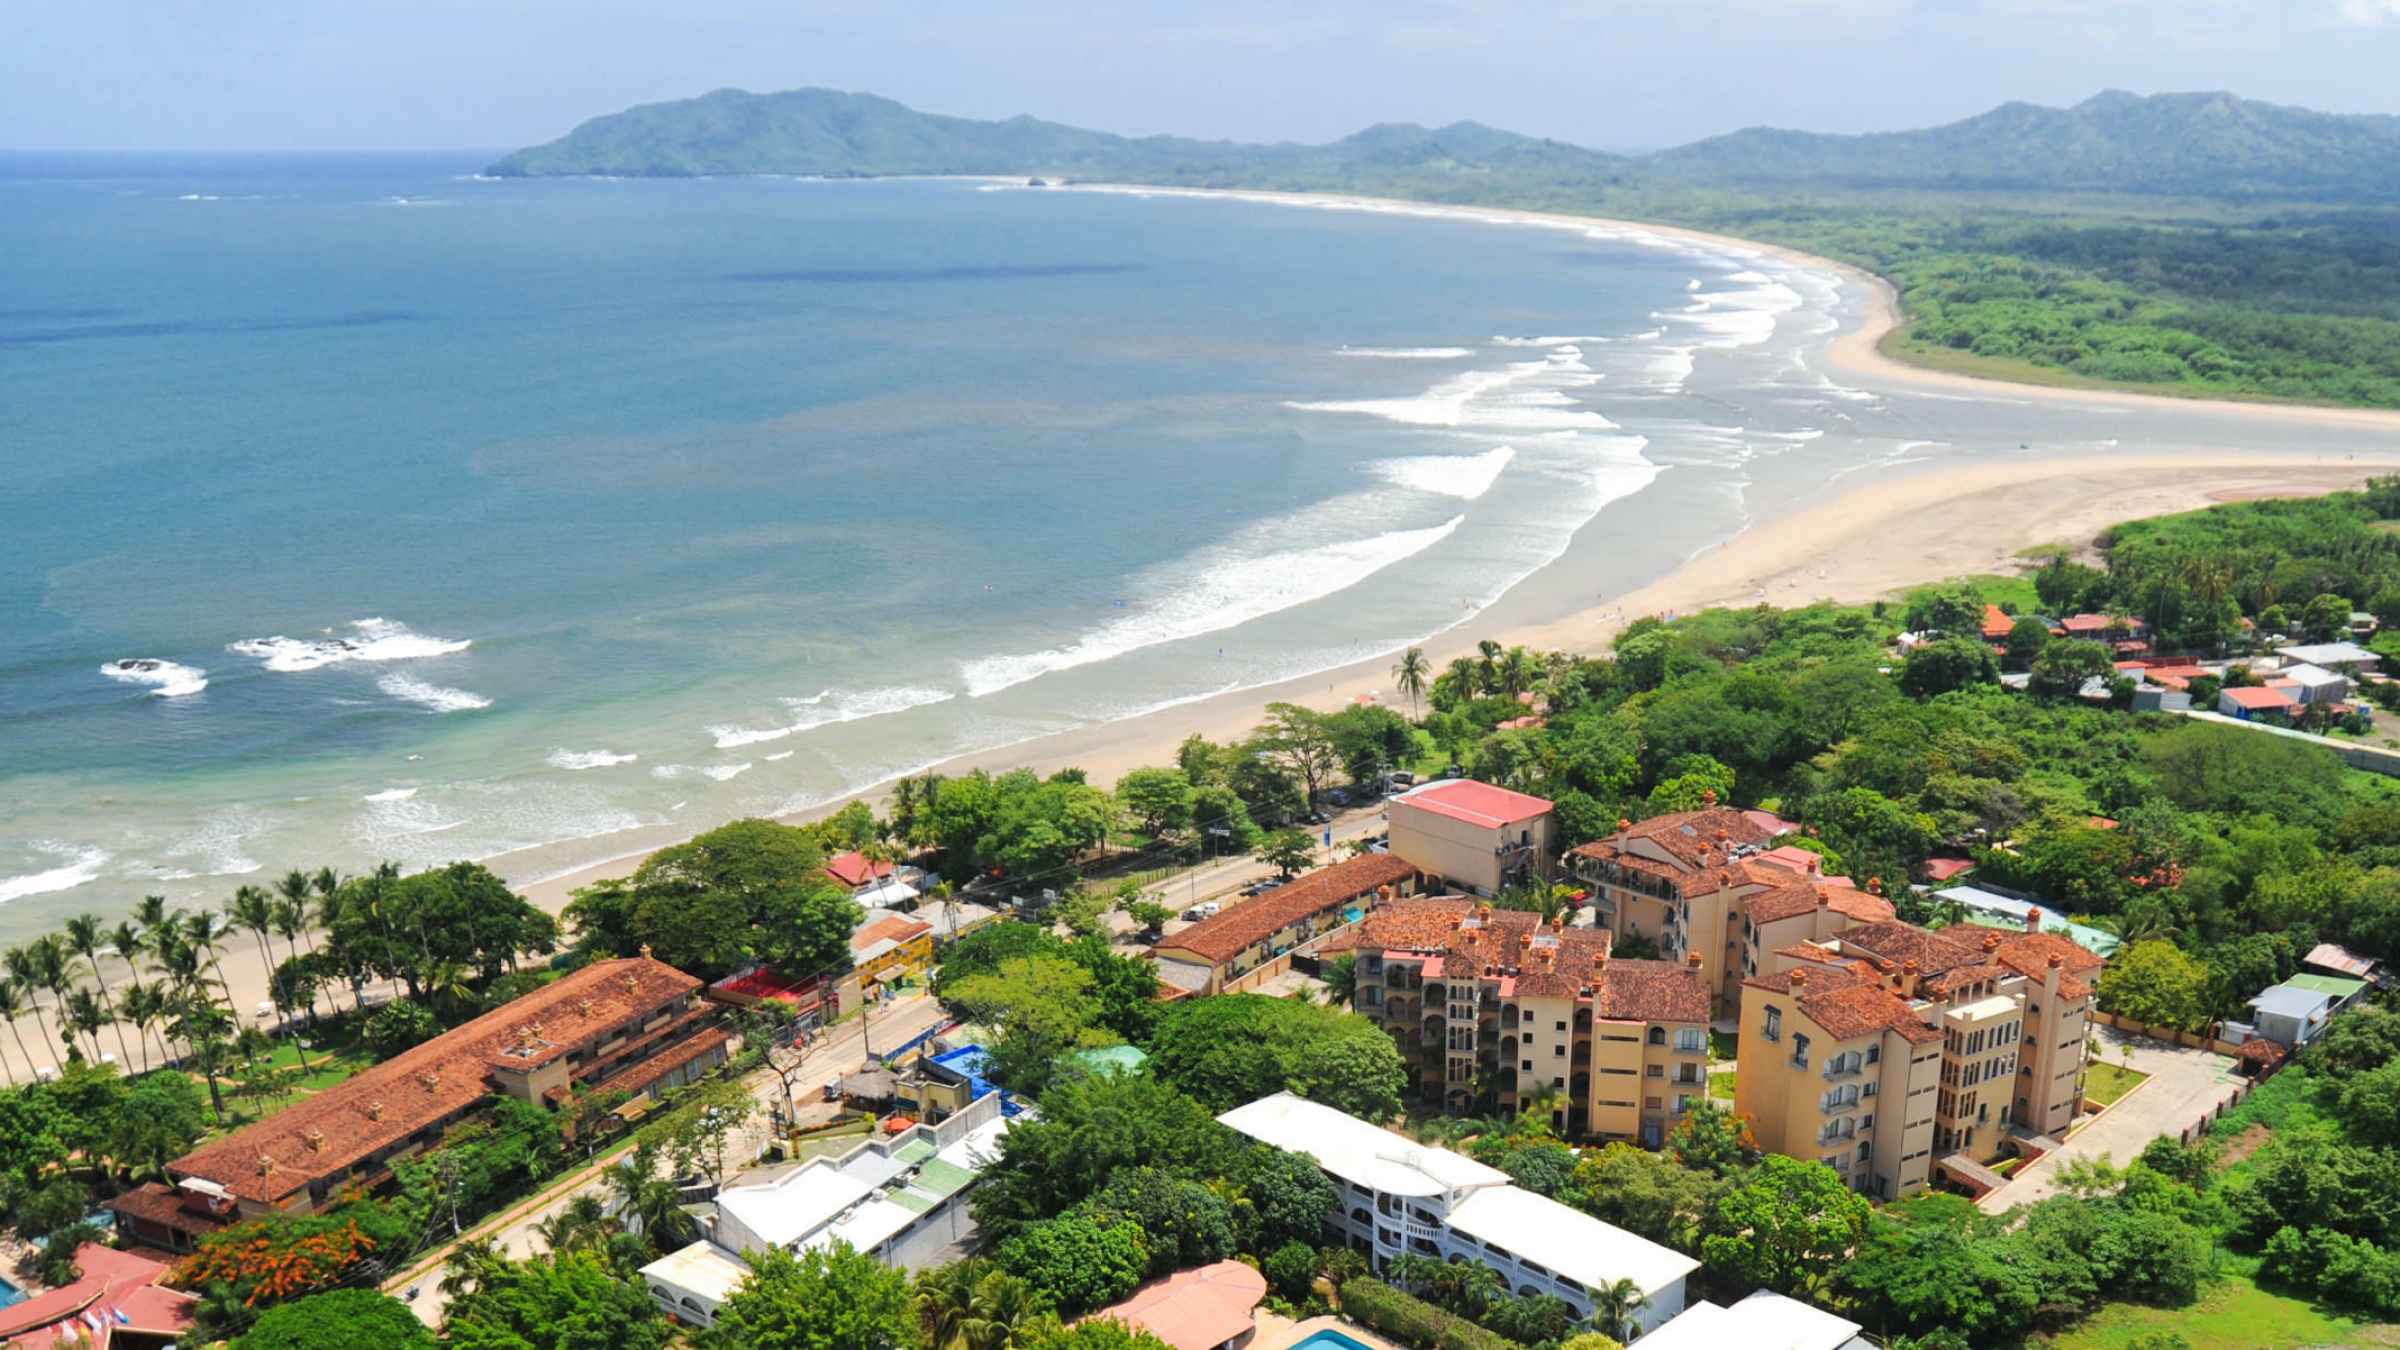 Tamarindo 21 Top 10 Tours Activities With Photos Things To Do In Tamarindo Costa Rica Getyourguide